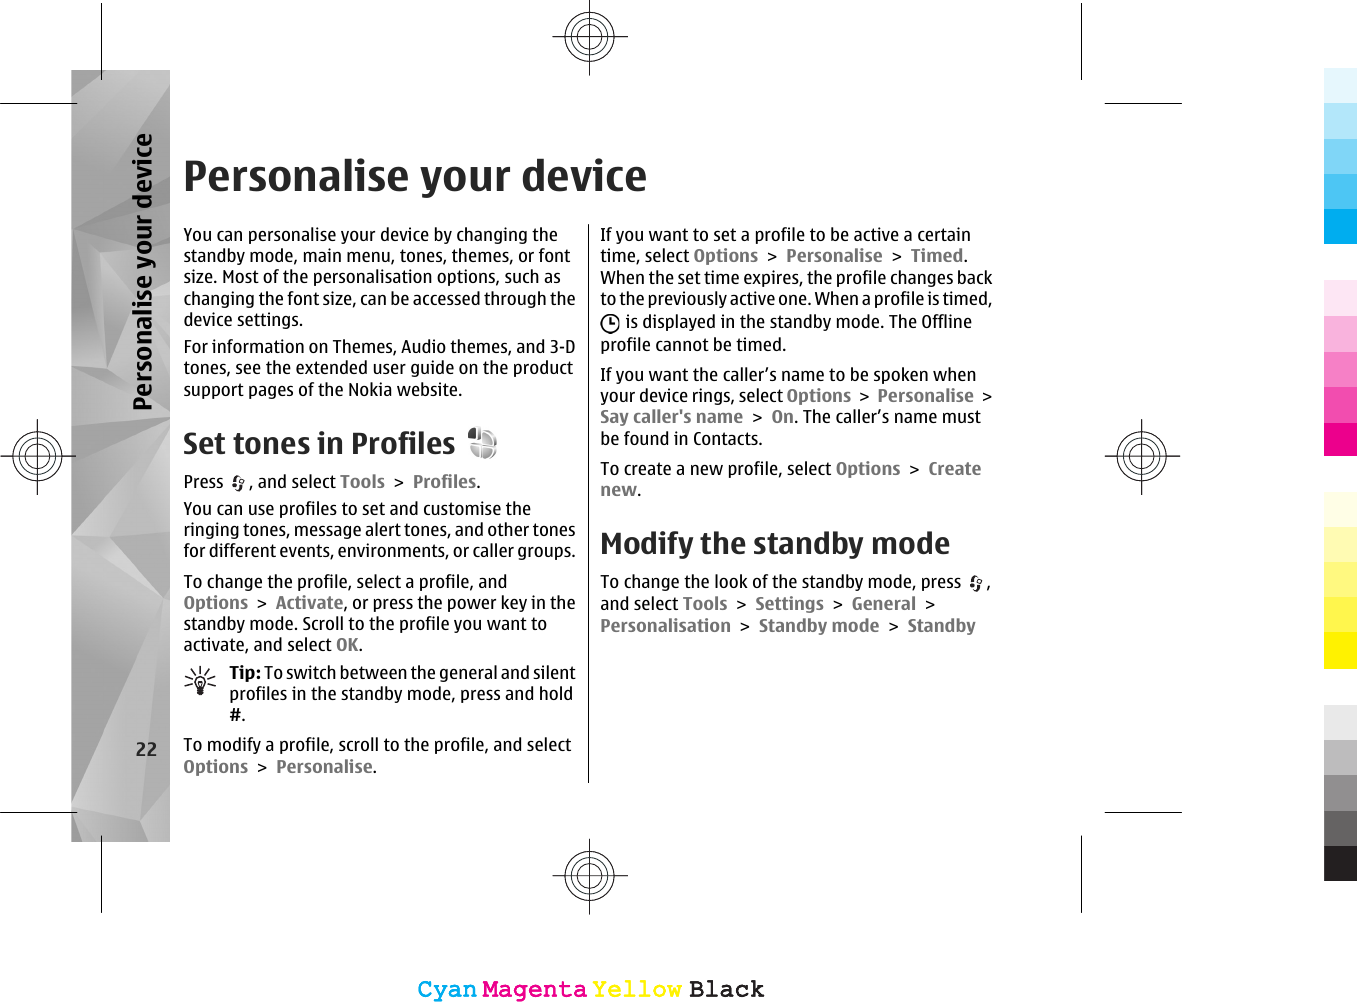 Personalise your deviceYou can personalise your device by changing thestandby mode, main menu, tones, themes, or fontsize. Most of the personalisation options, such aschanging the font size, can be accessed through thedevice settings.For information on Themes, Audio themes, and 3-Dtones, see the extended user guide on the productsupport pages of the Nokia website.Set tones in ProfilesPress  , and select Tools &gt; Profiles.You can use profiles to set and customise theringing tones, message alert tones, and other tonesfor different events, environments, or caller groups.To change the profile, select a profile, andOptions &gt; Activate, or press the power key in thestandby mode. Scroll to the profile you want toactivate, and select OK.Tip: To switch between the general and silentprofiles in the standby mode, press and hold#.To modify a profile, scroll to the profile, and selectOptions &gt; Personalise.If you want to set a profile to be active a certaintime, select Options &gt; Personalise &gt; Timed.When the set time expires, the profile changes backto the previously active one. When a profile is timed, is displayed in the standby mode. The Offlineprofile cannot be timed.If you want the caller’s name to be spoken whenyour device rings, select Options &gt; Personalise &gt;Say caller&apos;s name &gt; On. The caller’s name mustbe found in Contacts.To create a new profile, select Options &gt; Createnew.Modify the standby modeTo change the look of the standby mode, press  ,and select Tools &gt; Settings &gt; General &gt;Personalisation &gt; Standby mode &gt; Standby22Personalise your deviceCyanCyanMagentaMagentaYellowYellowBlackBlackCyanCyanMagentaMagentaYellowYellowBlackBlack